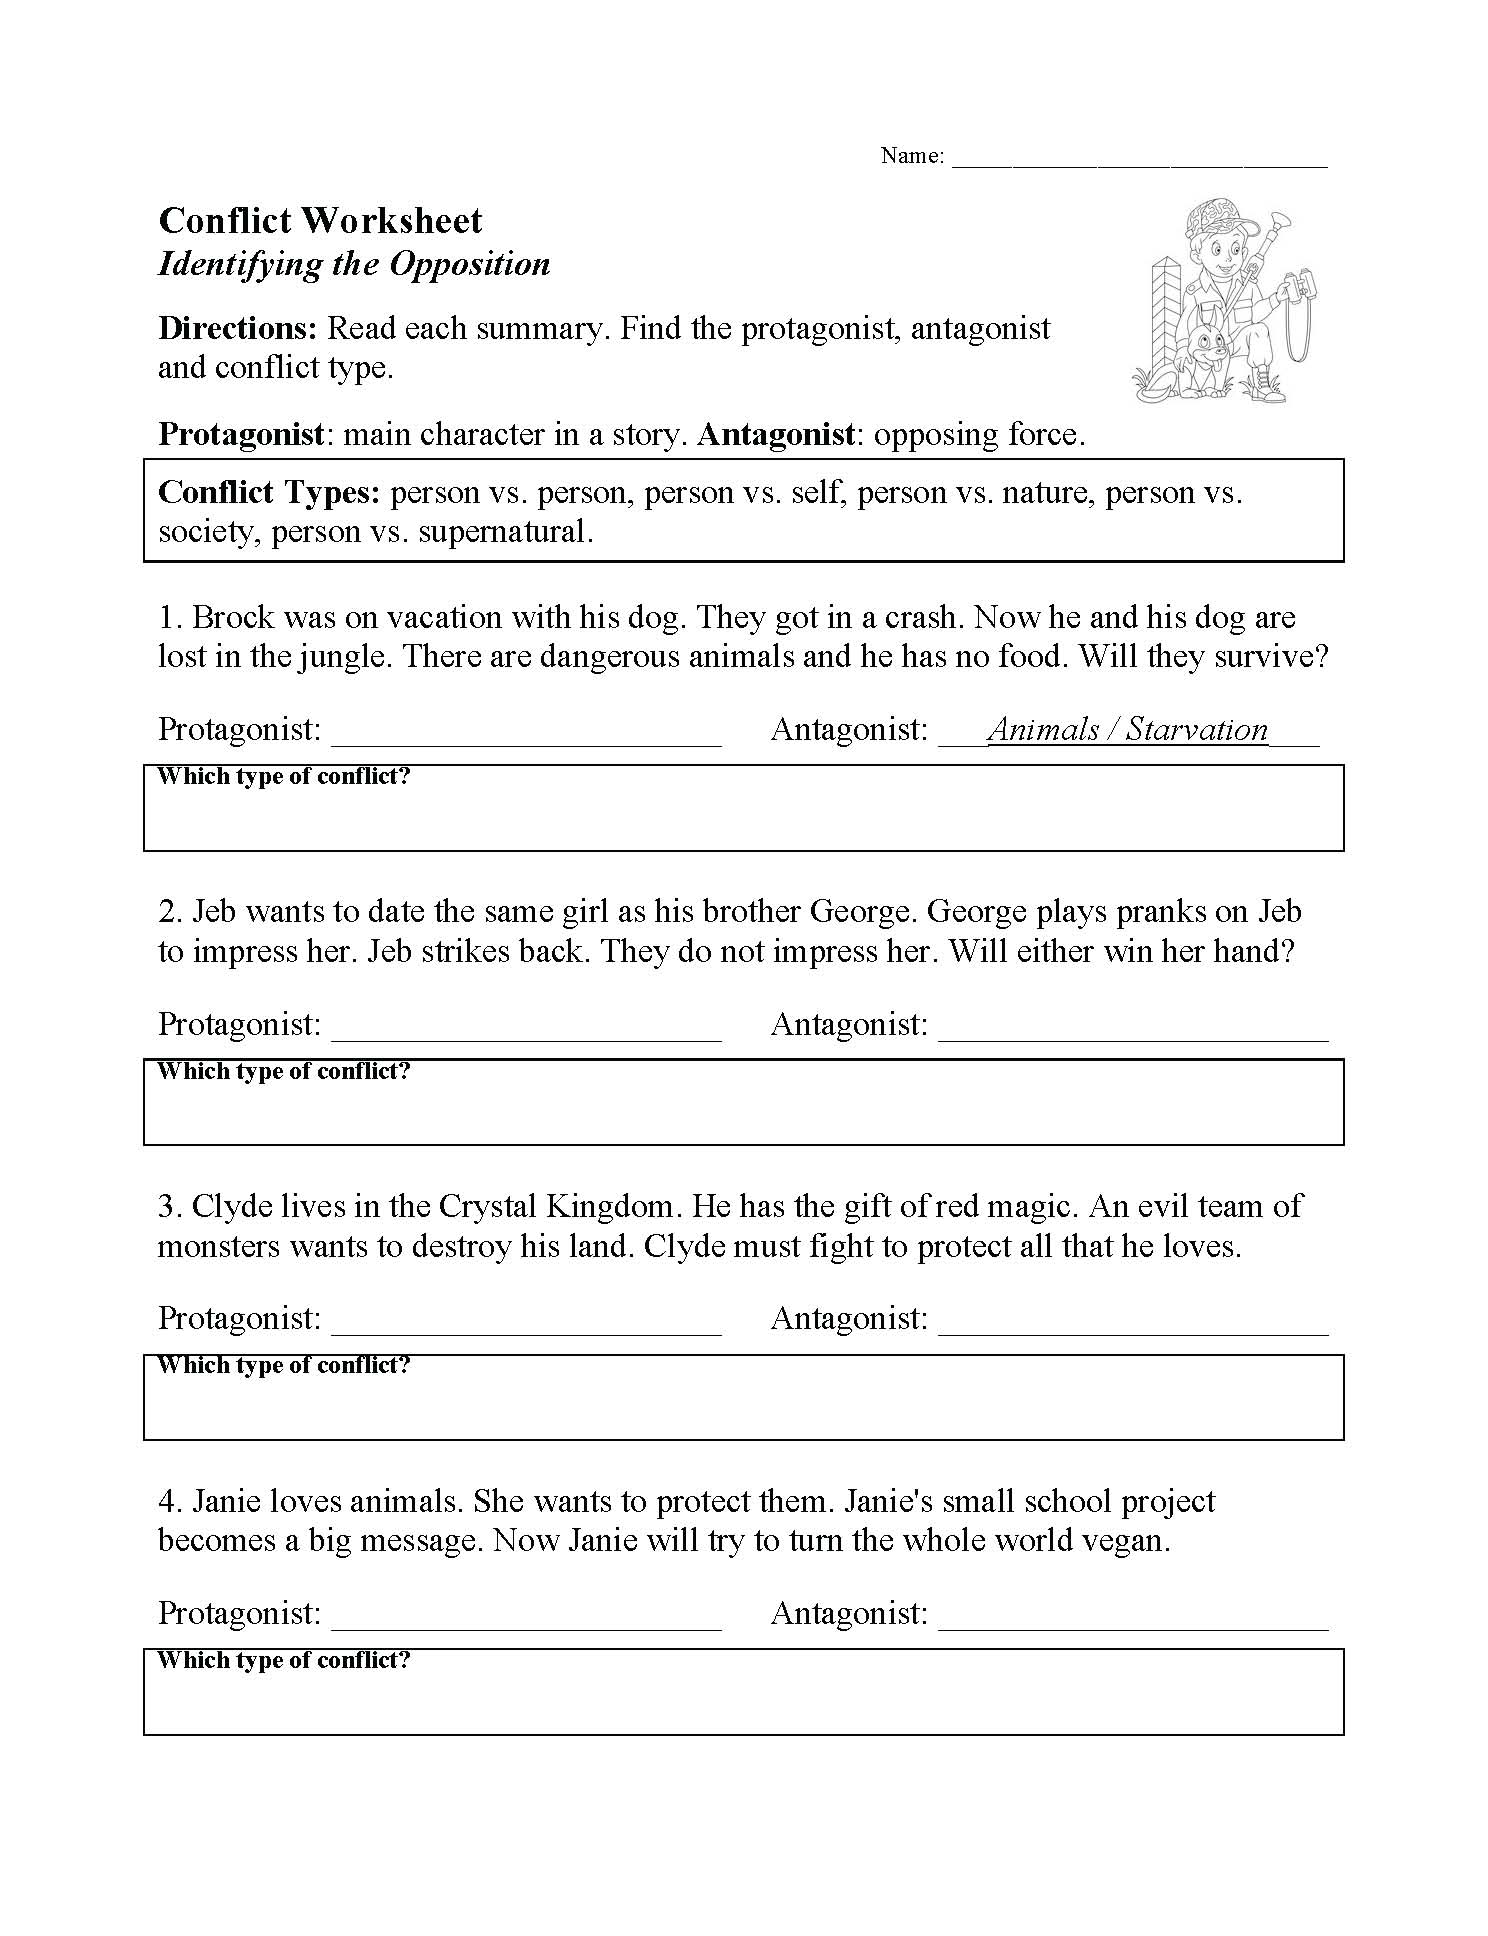 This is a preview image of our Conflict Worksheet. Click on it to enlarge this image and view the source file.